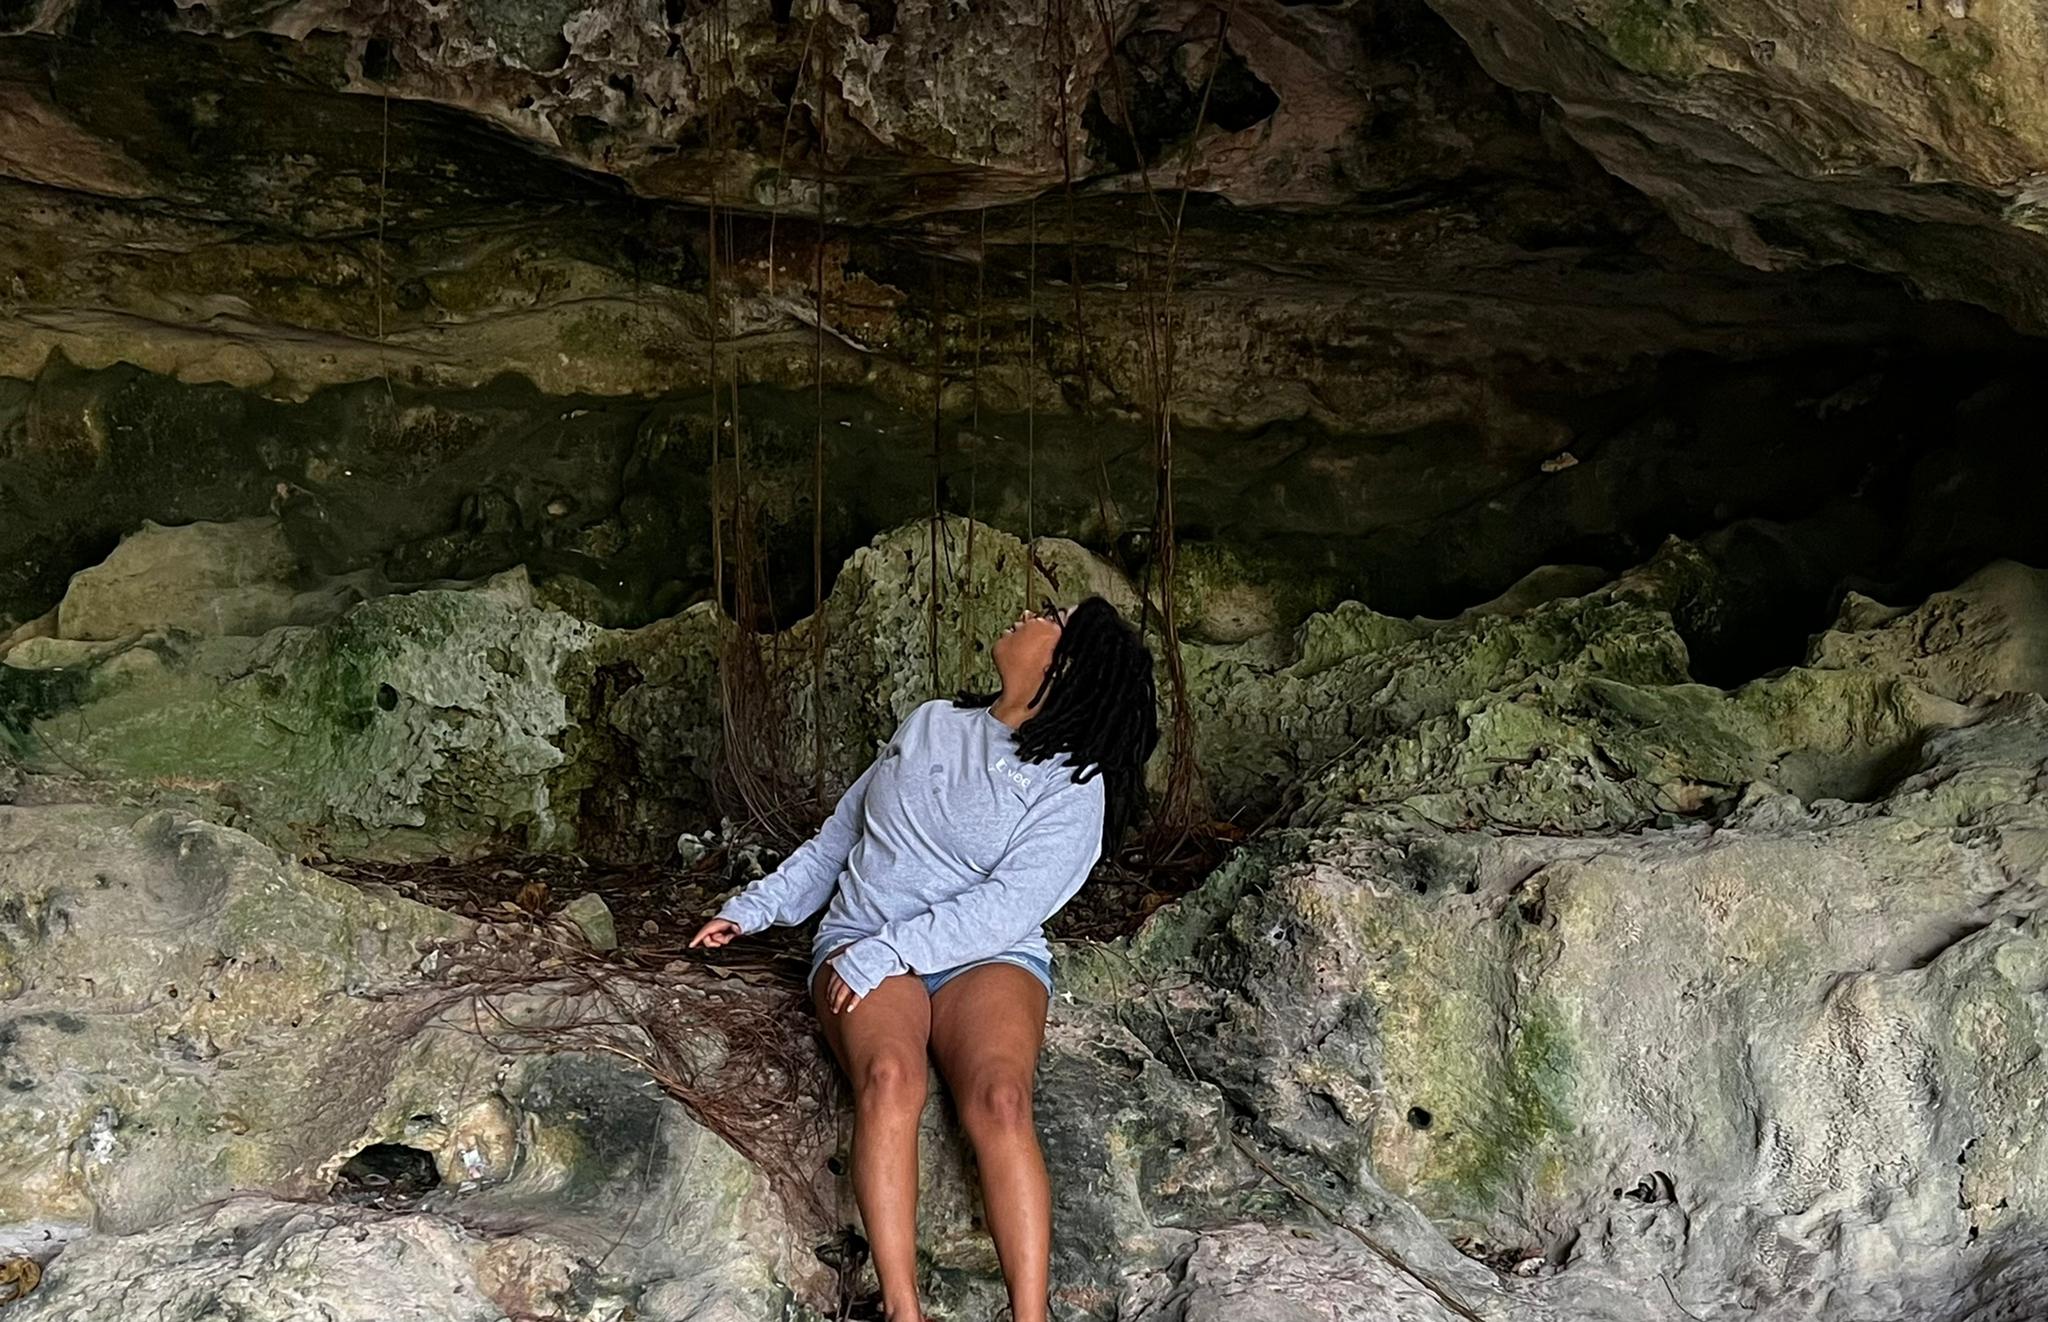 Explore the Bahamian caves and caverns